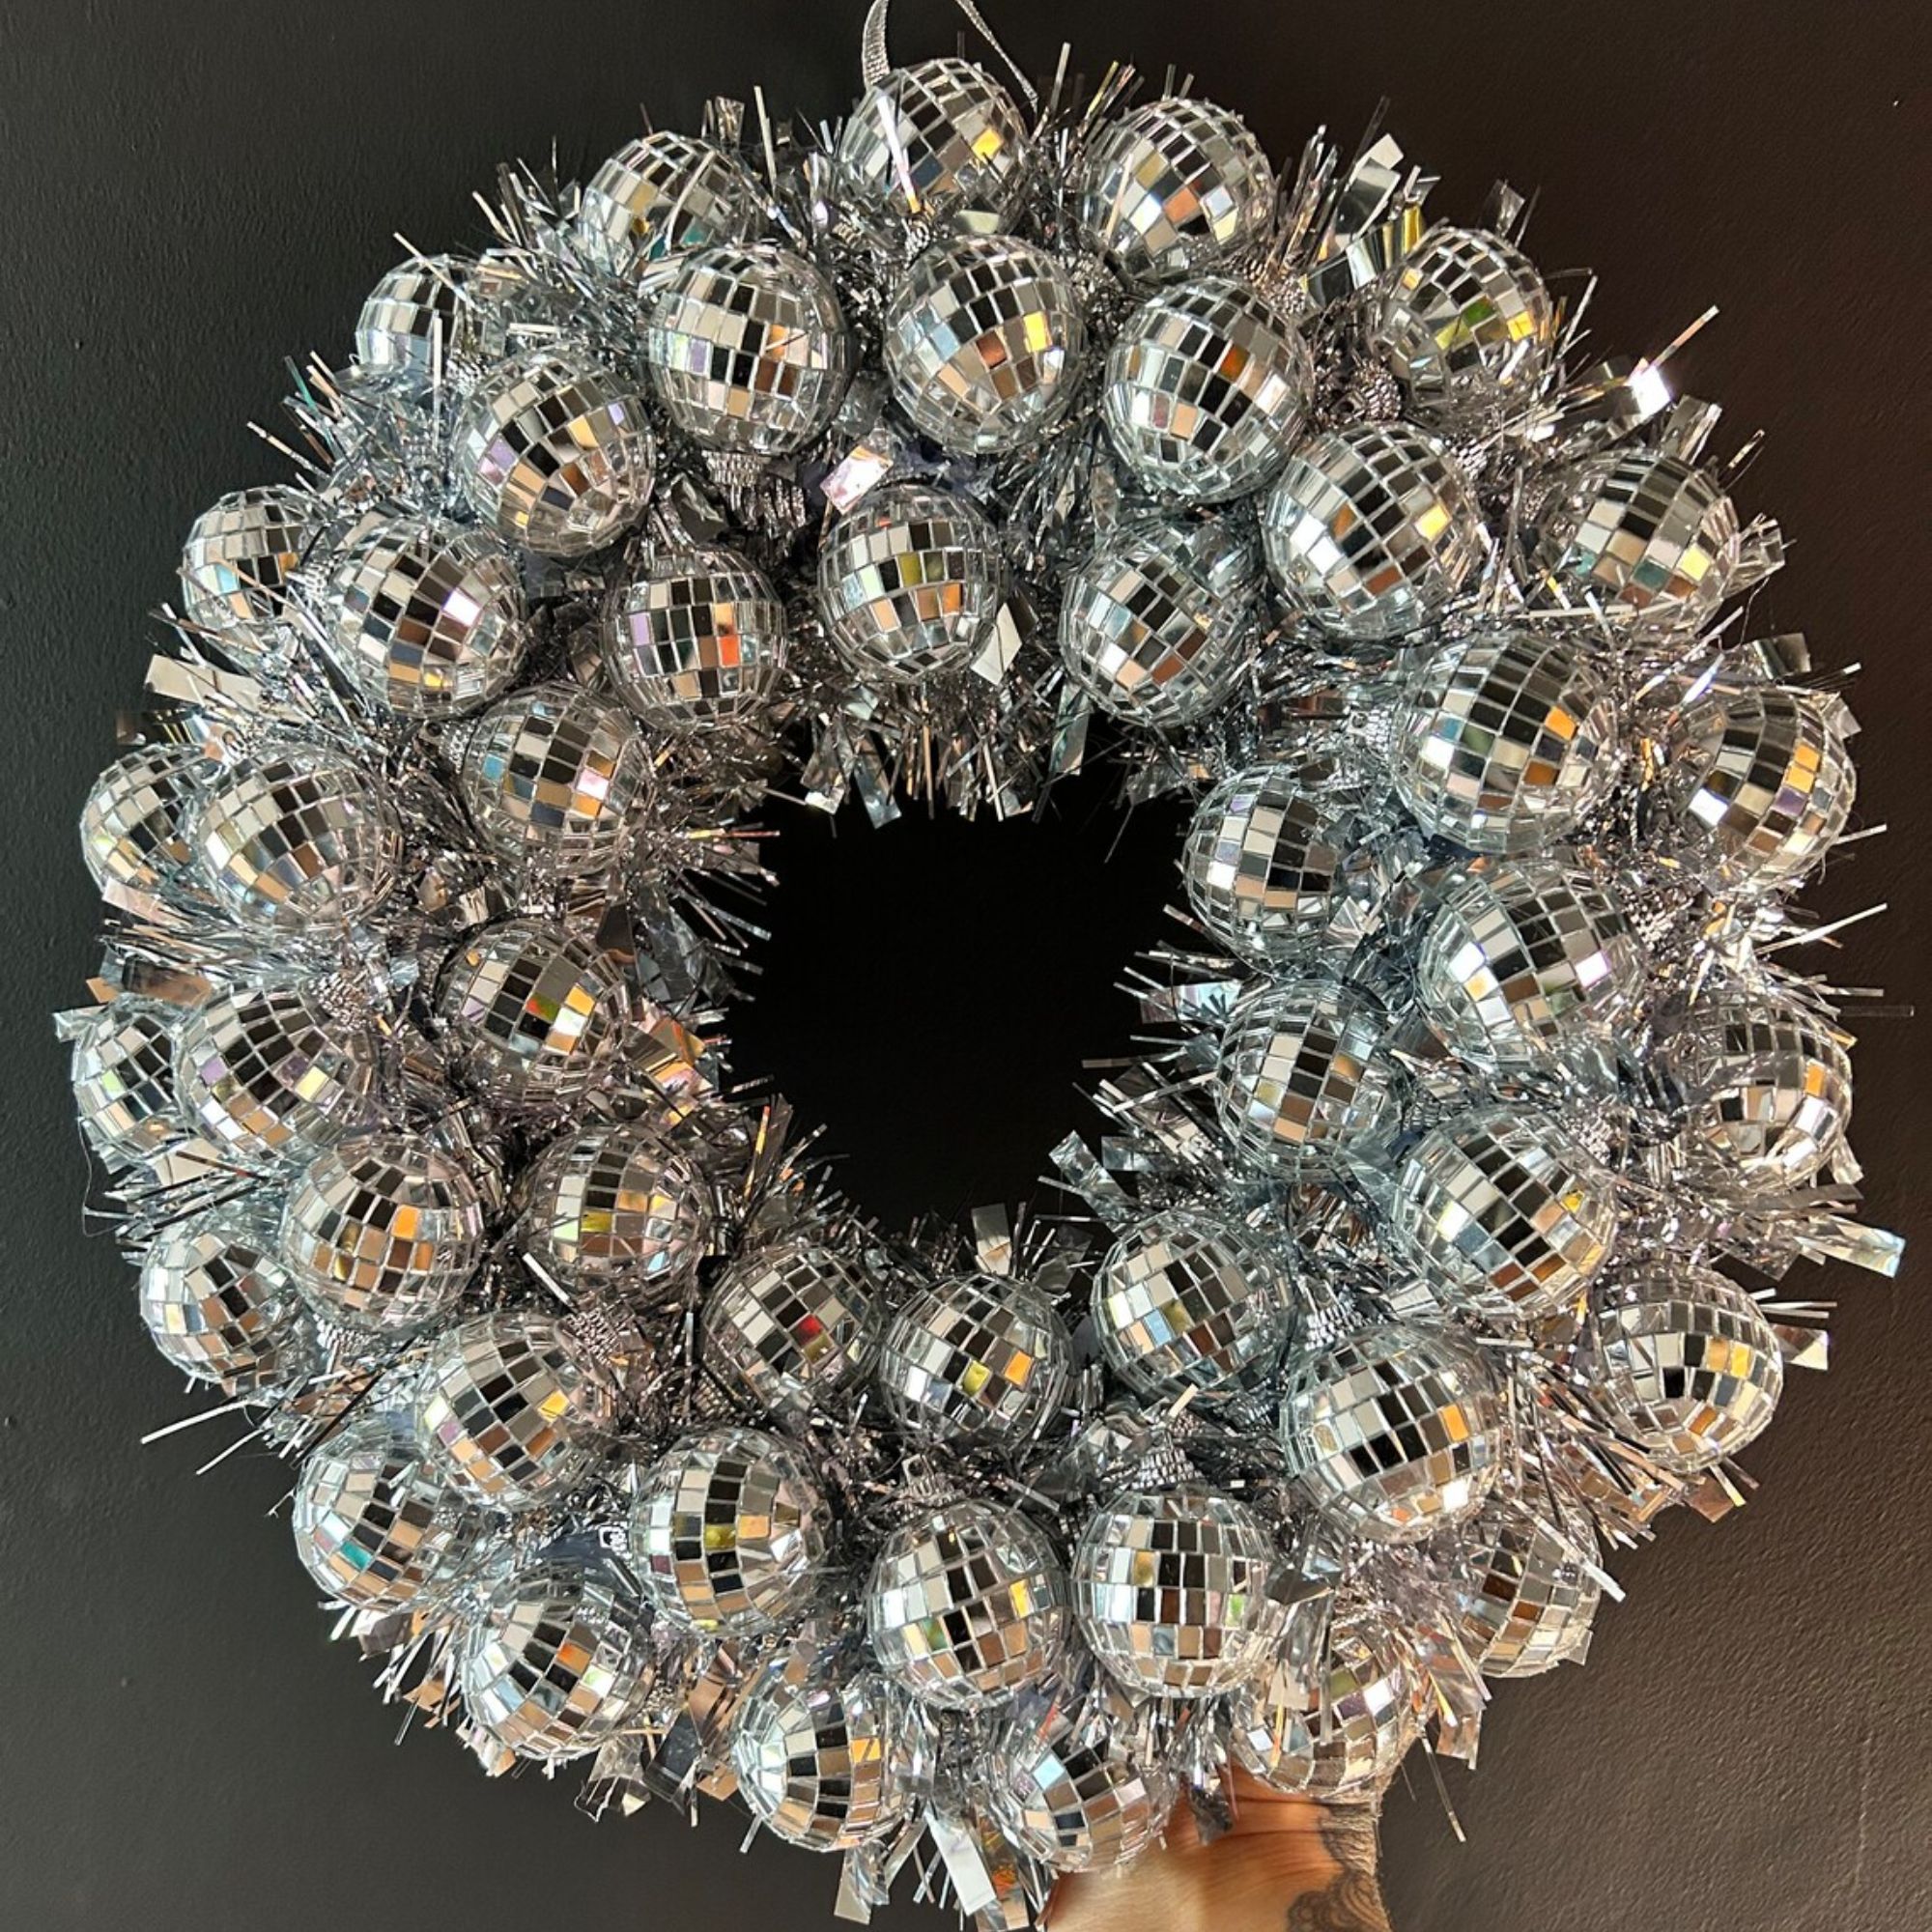 A Christmas wreath crafted from disco ball baubles